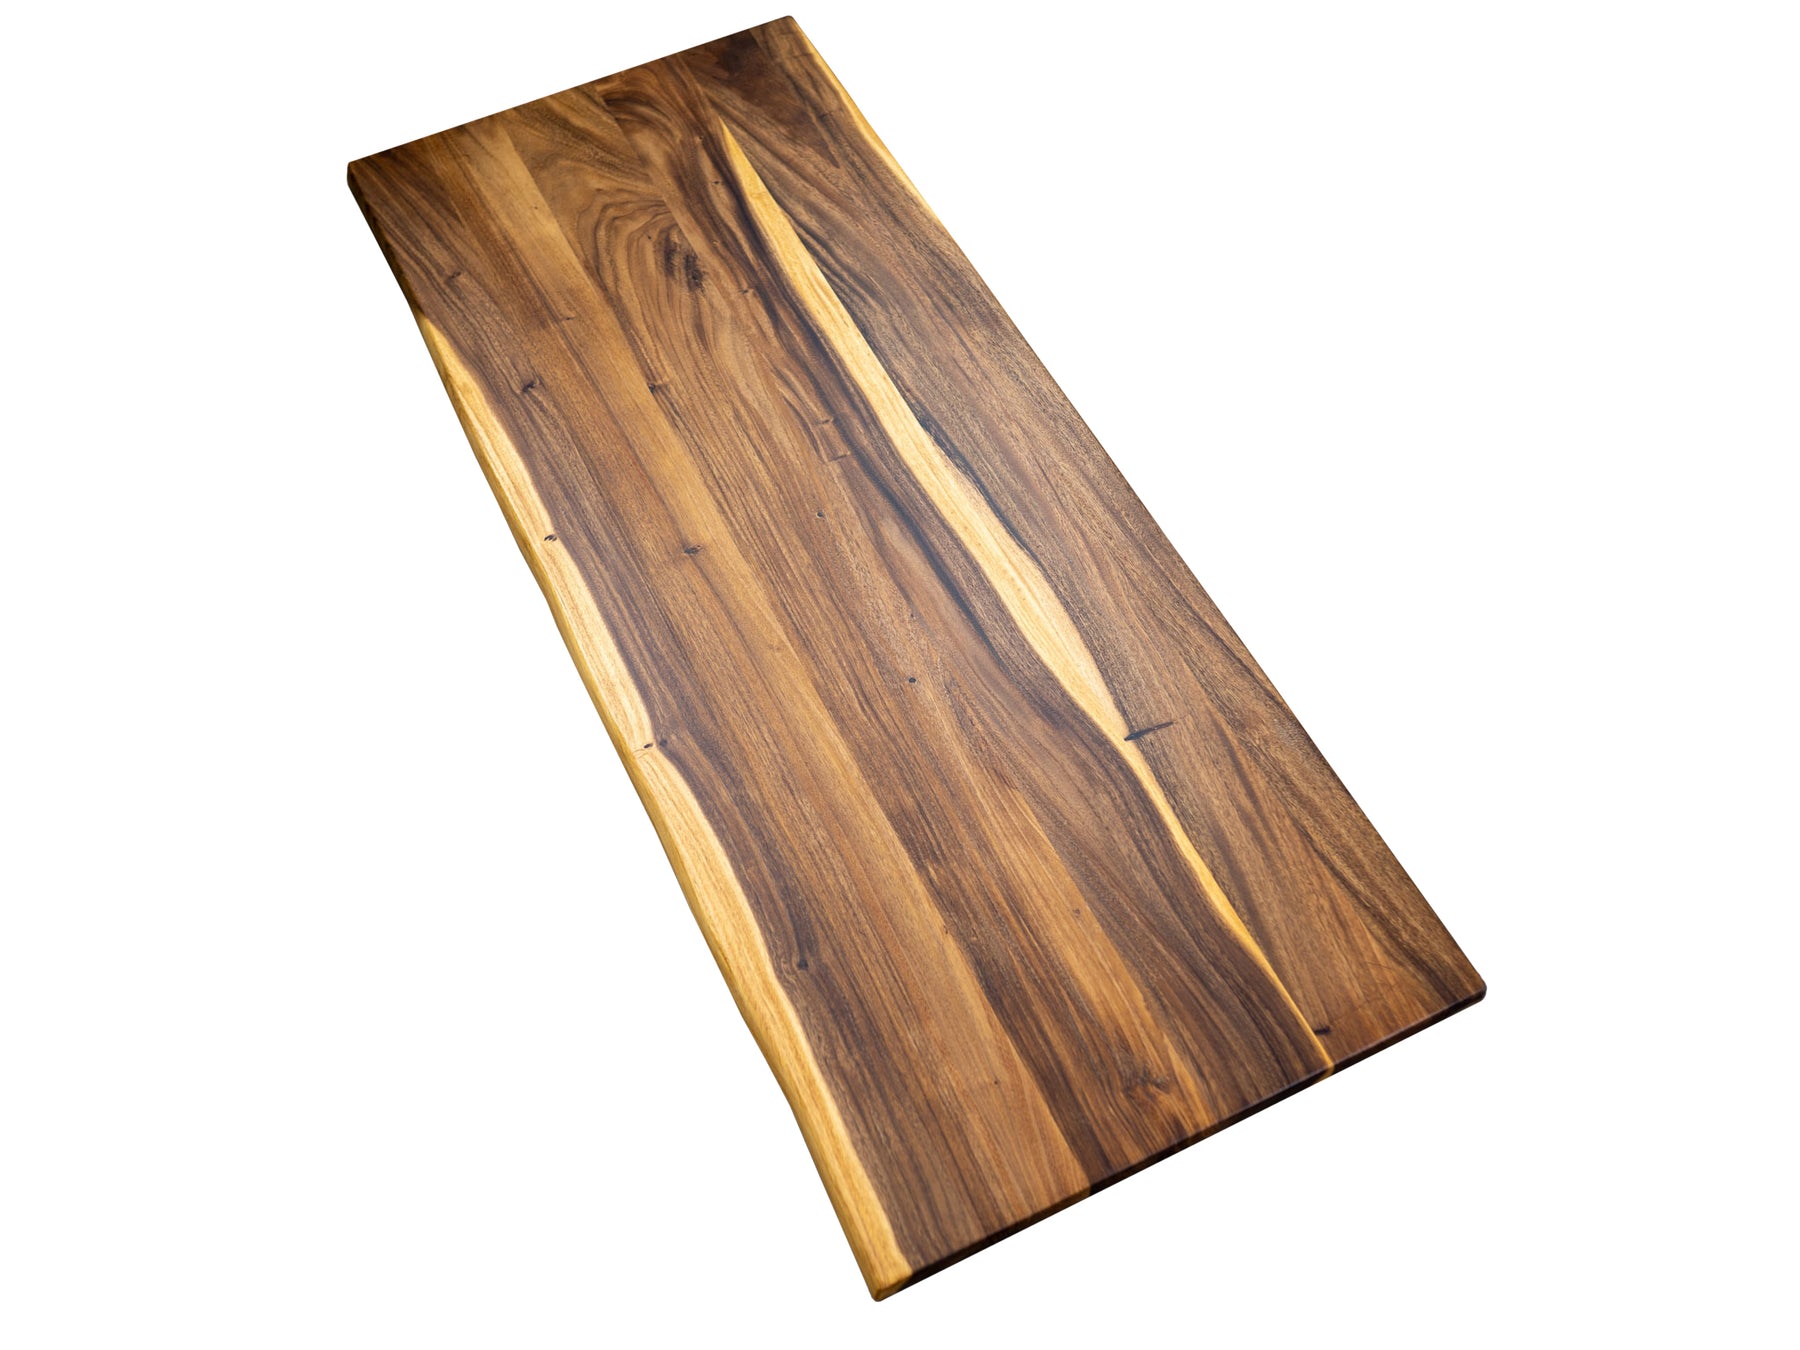 Live Edge Dining Table Top | South American Walnut | Durable Finish